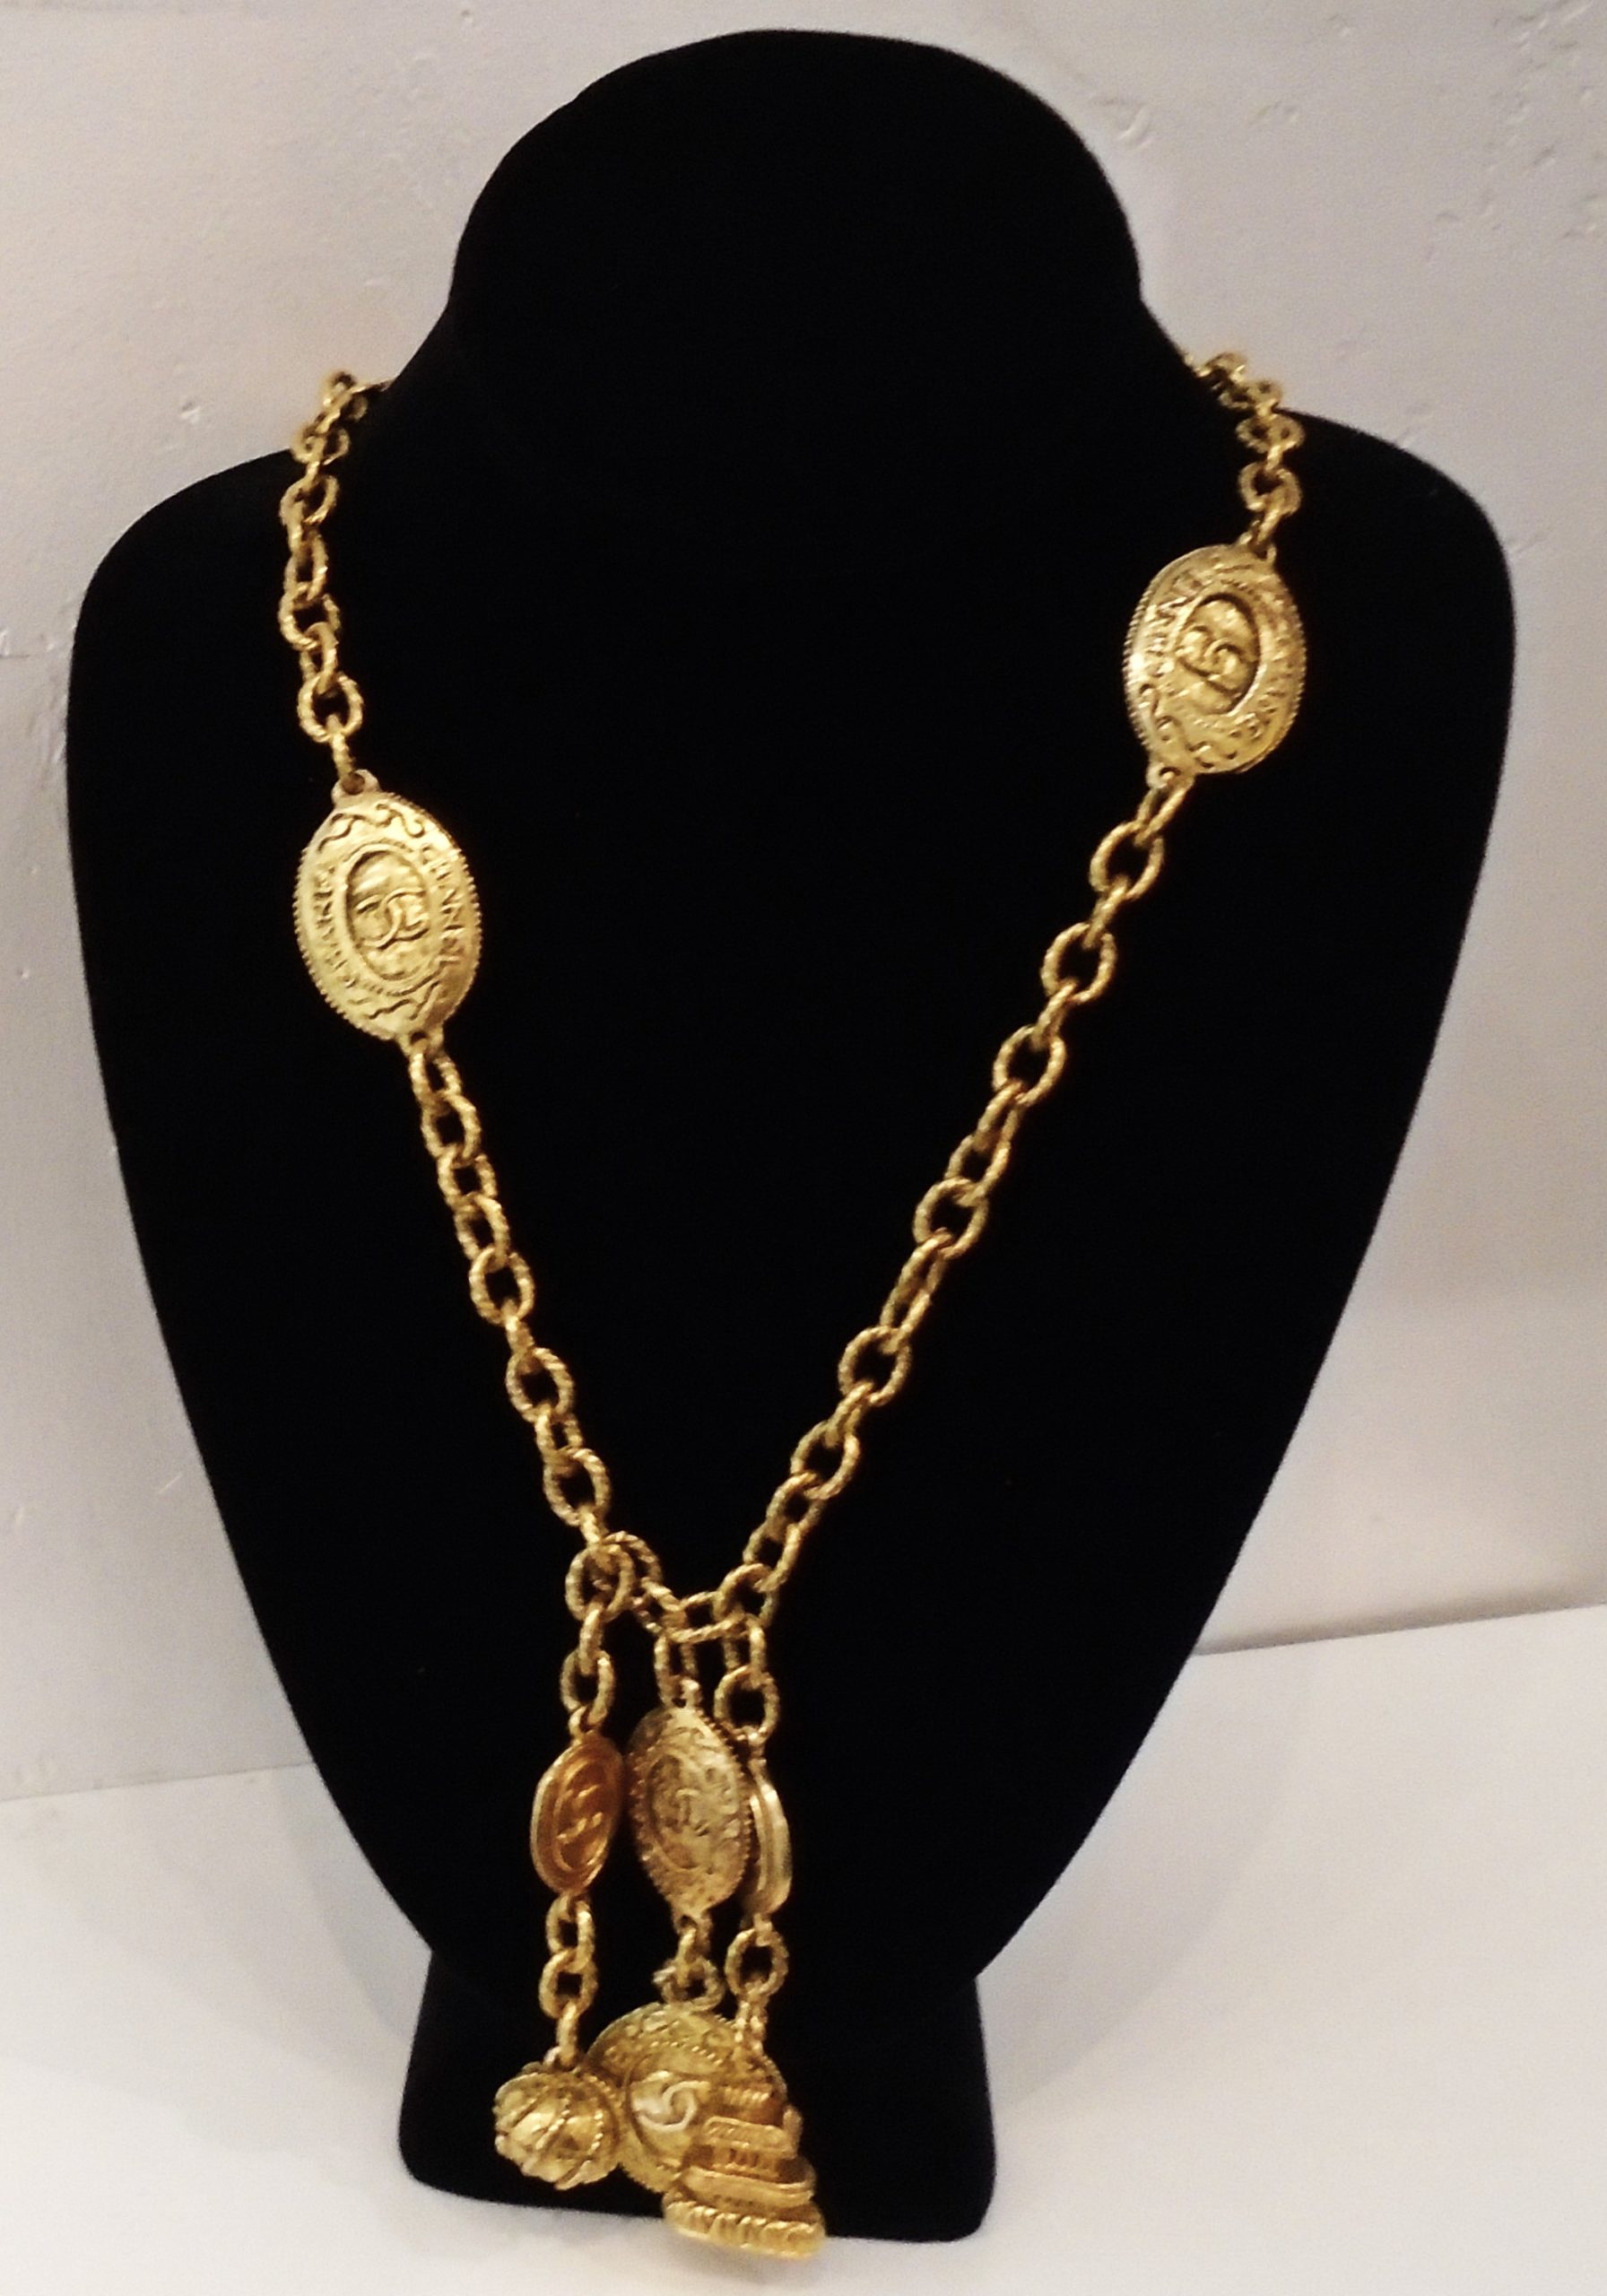 Chanel Vintage Large CC Coin Pendant Necklace | Rent Chanel jewelry for  $55/month - Join Switch